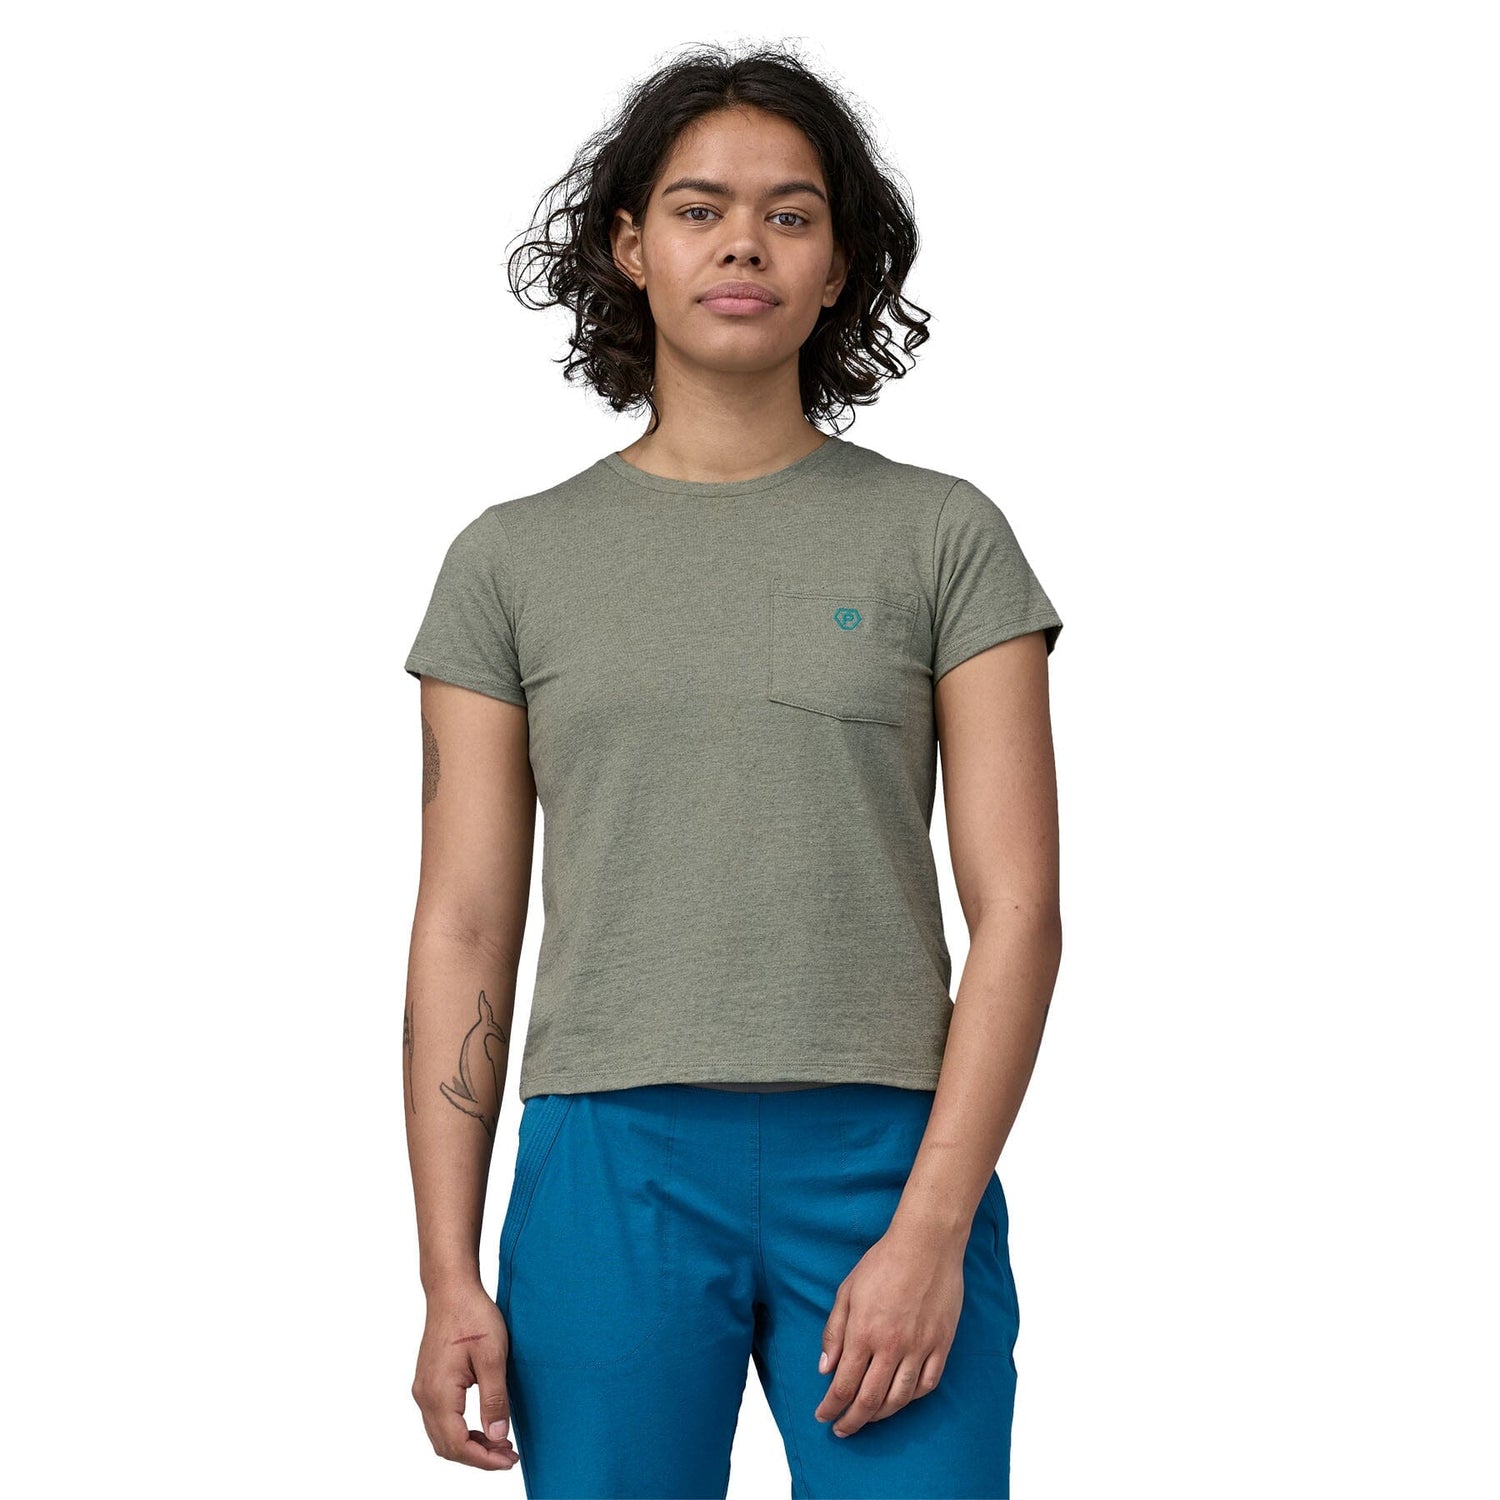 Patagonia - W's Clean Climb Bloom Pocket Responsibili-Tee - Recycled Cotton & Recycled Polyester - Weekendbee - sustainable sportswear